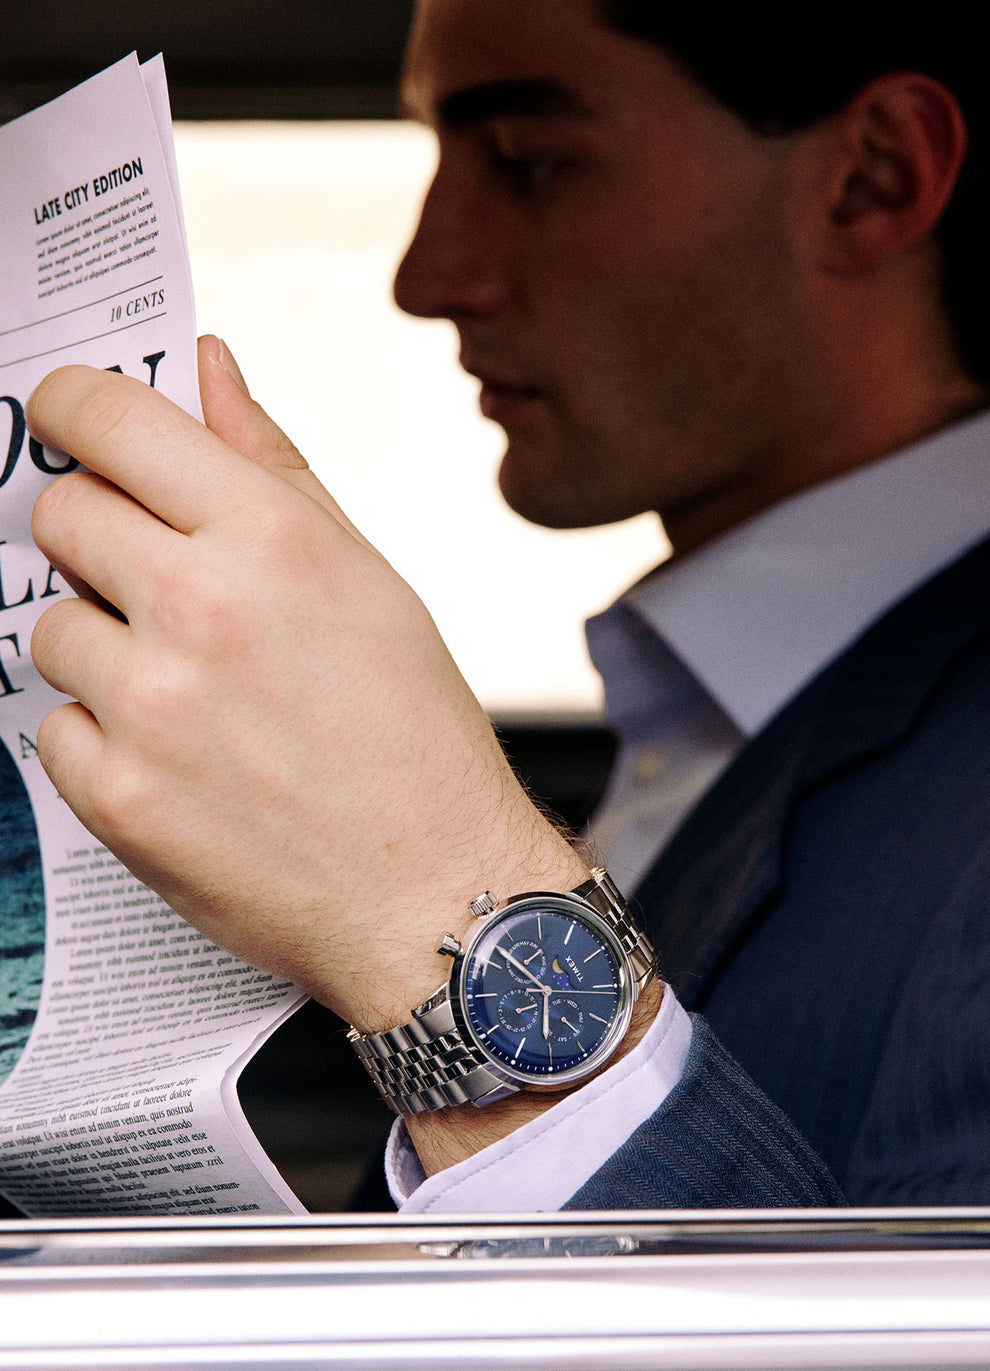 Man wearing the Marlin Moon Phase Blue dial watch whilst reading the newspapaer